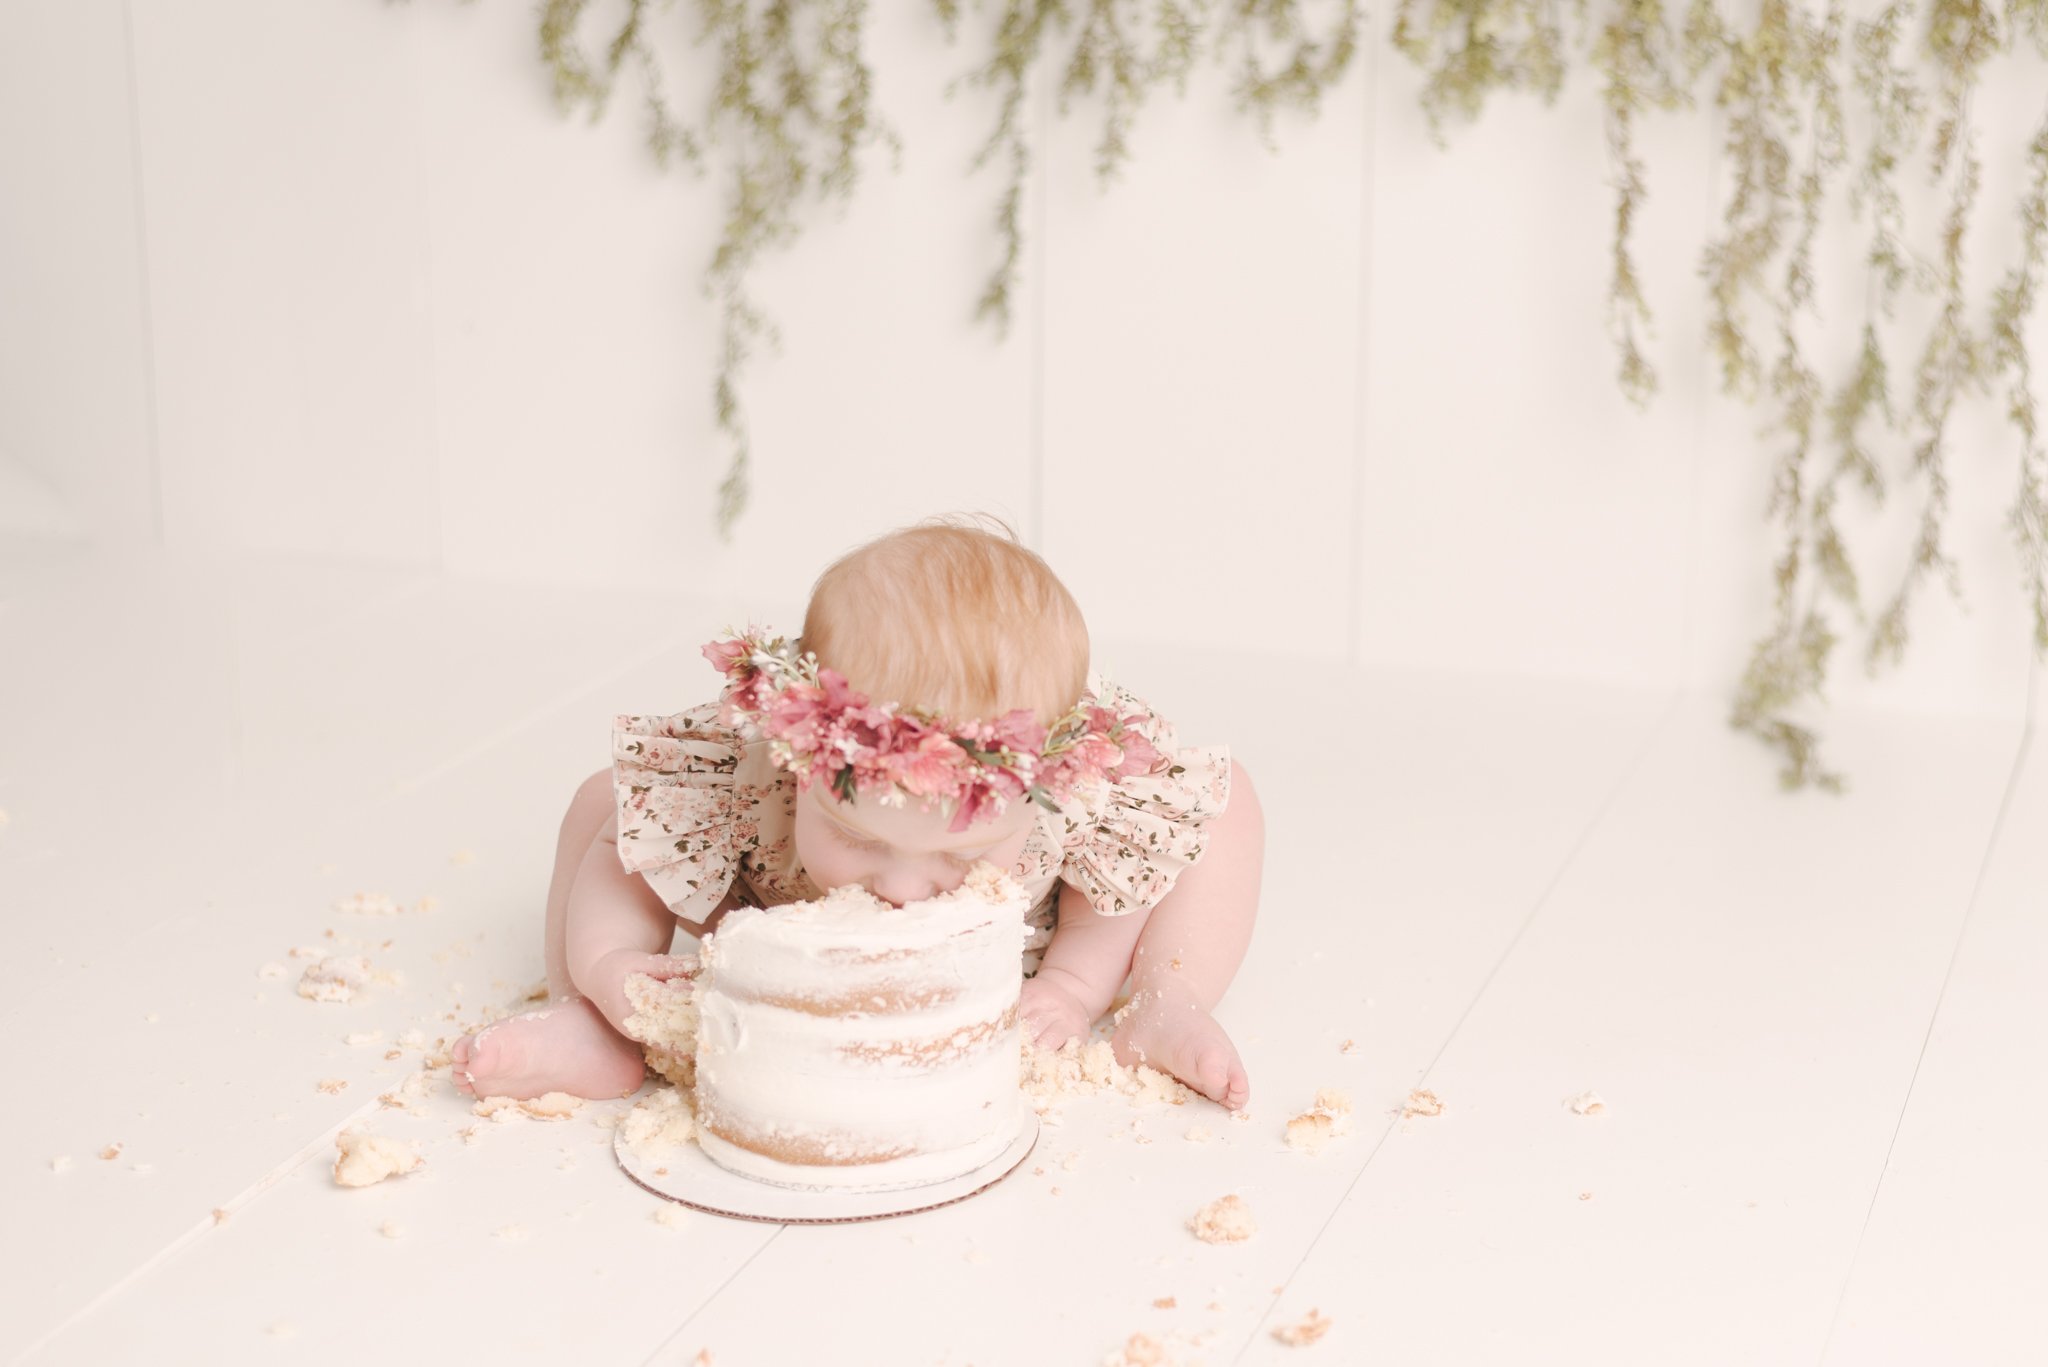 Greenery_Pink_Floral_Boho_Frist_Birthday_Girl_Smash_and_Splash_Session_Cake_Studio_by_Erika_Child_and_Family_Photographer_for_Christie_Leigh_Photo_in_Warren_OH_Ohio_Trumbull_County_005.jpg